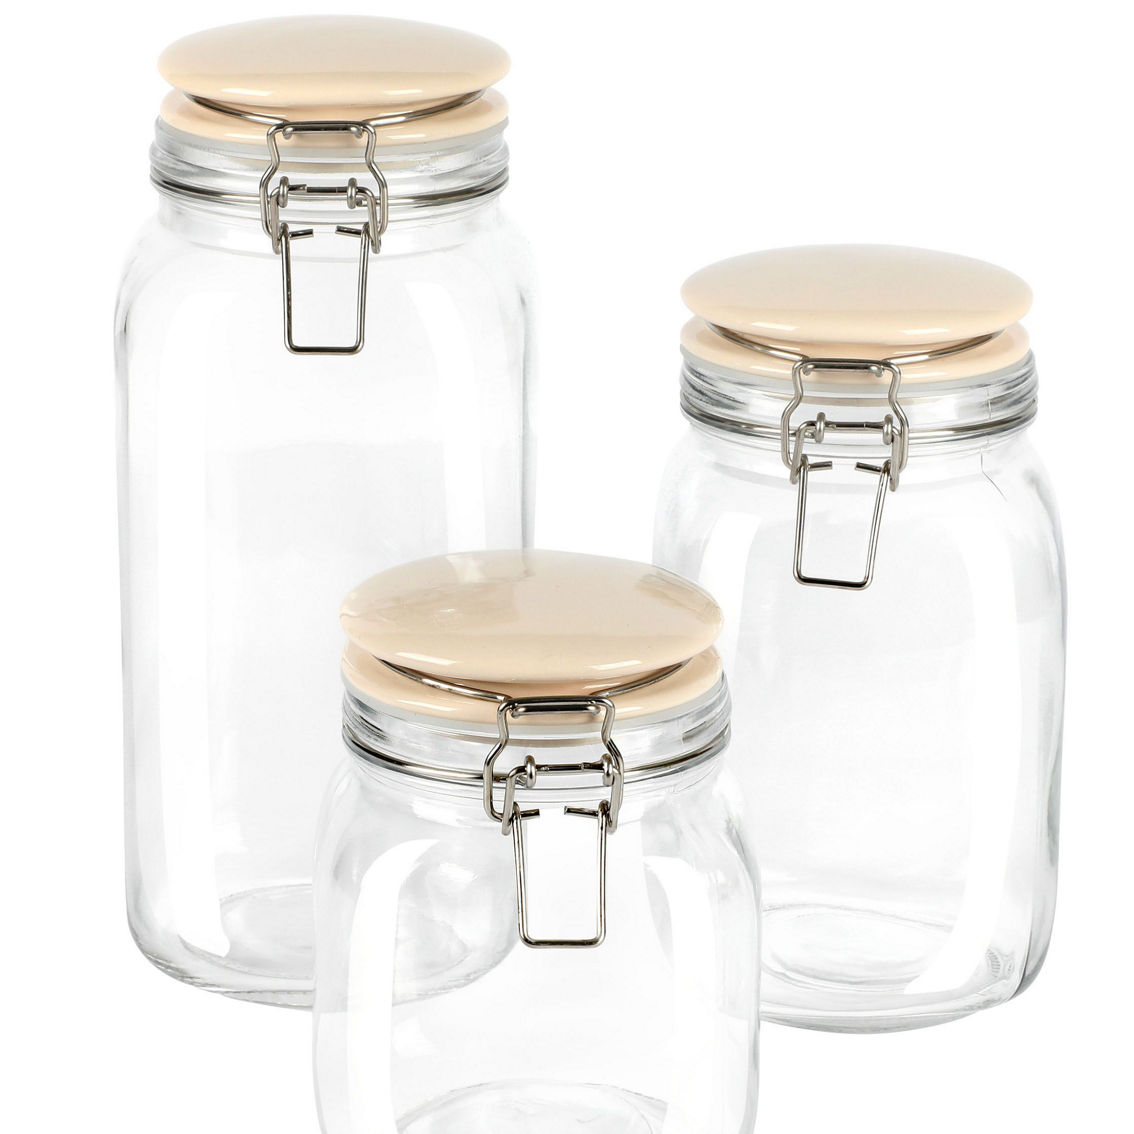 Martha Stewart Rindleton 3 Piece Glass Canister Set with Ceramic Lids in Off-Whi - Image 2 of 5